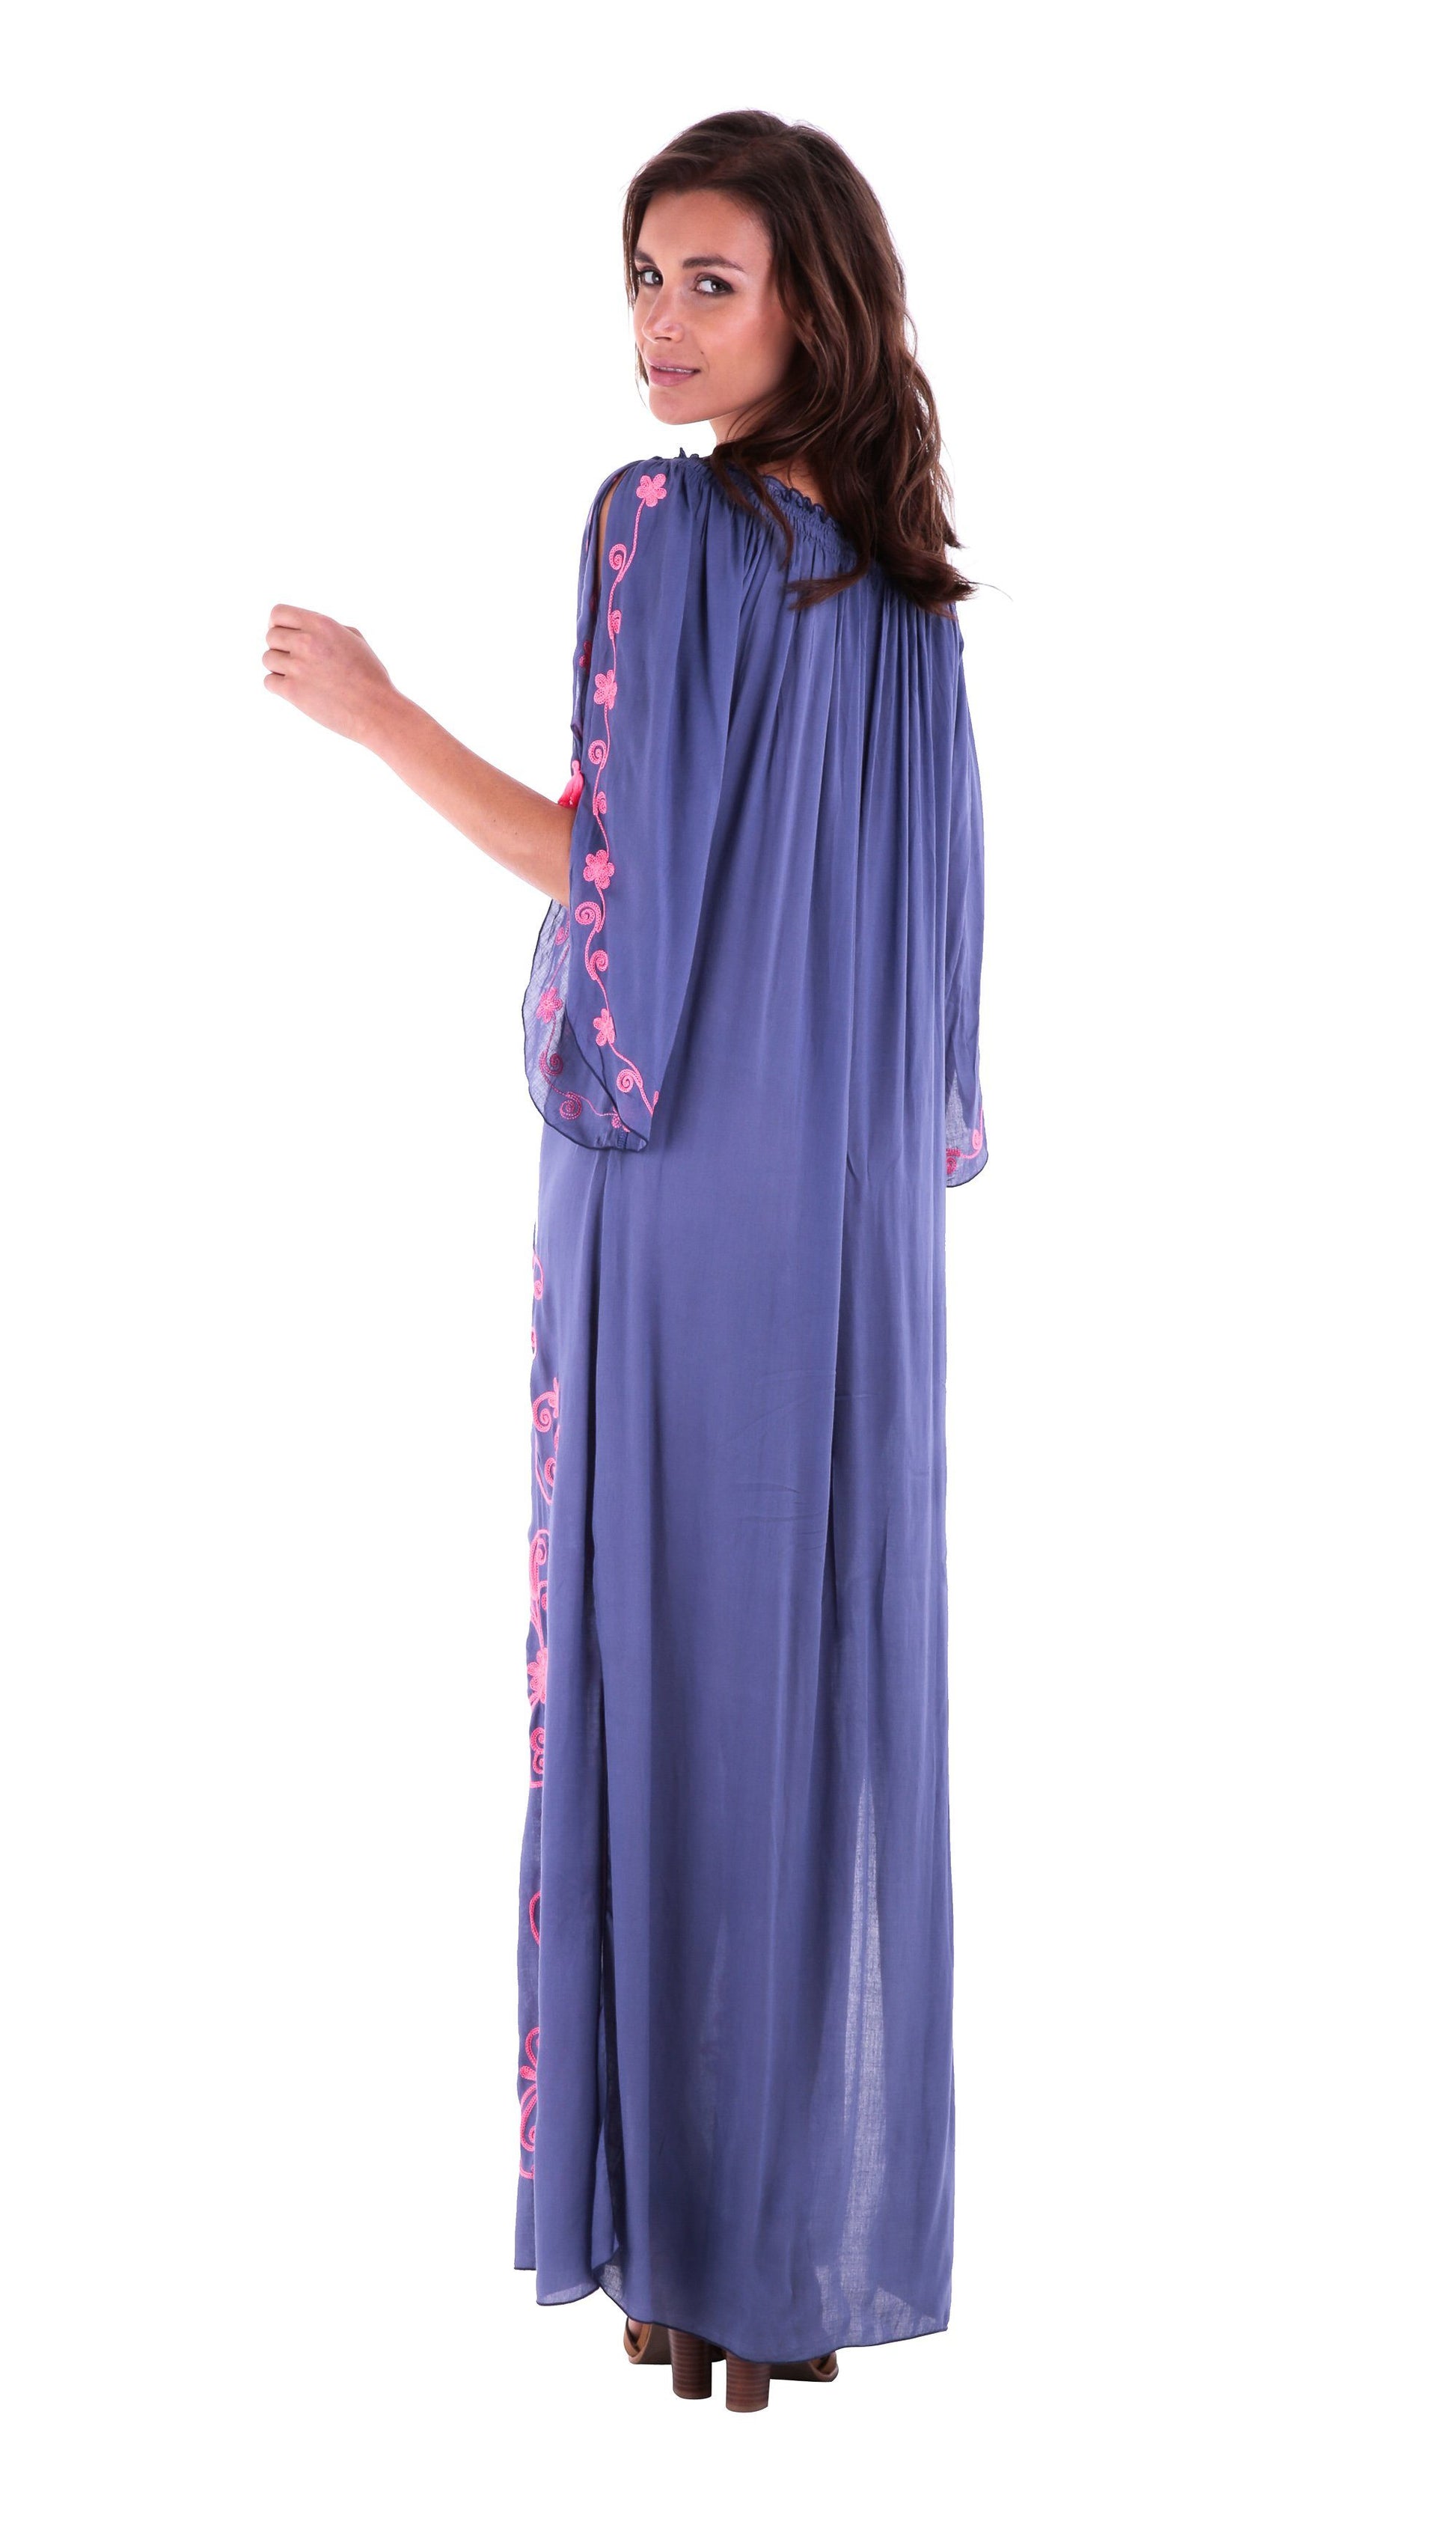 Chloe Embroidered Maxi Dress with Side Slit - Love-Shu-Shi-Periwinkle Maxi Dress